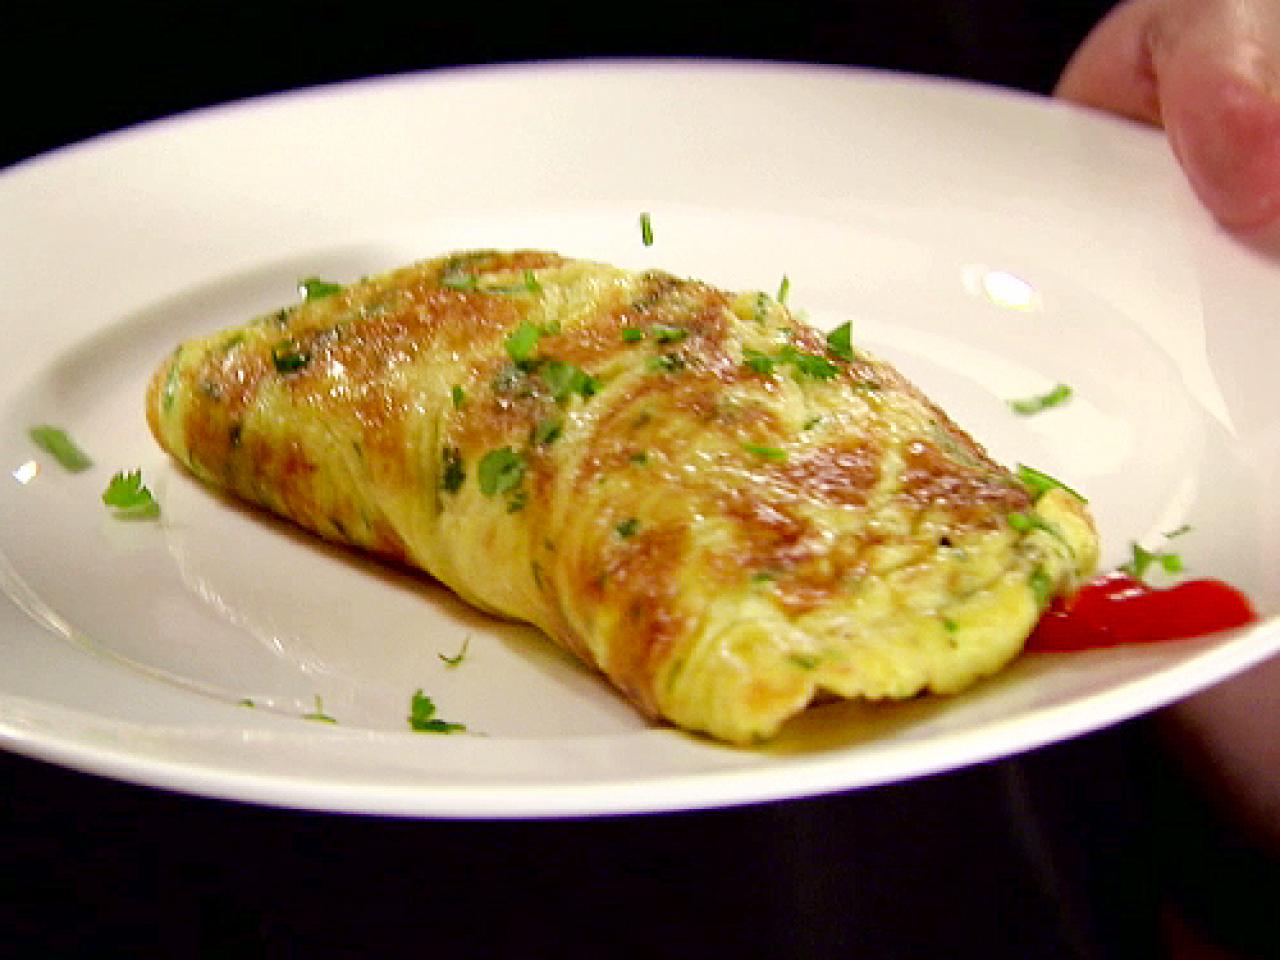 The Last Omelet Recipe You'll Ever Need